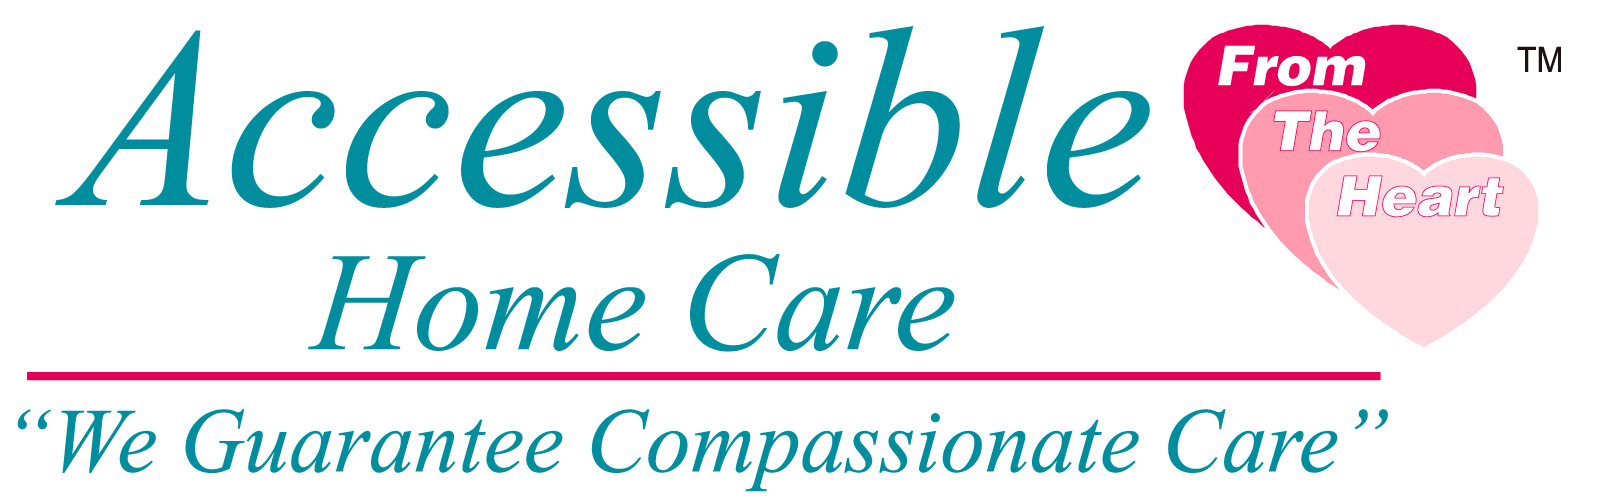 Accessible Home Care